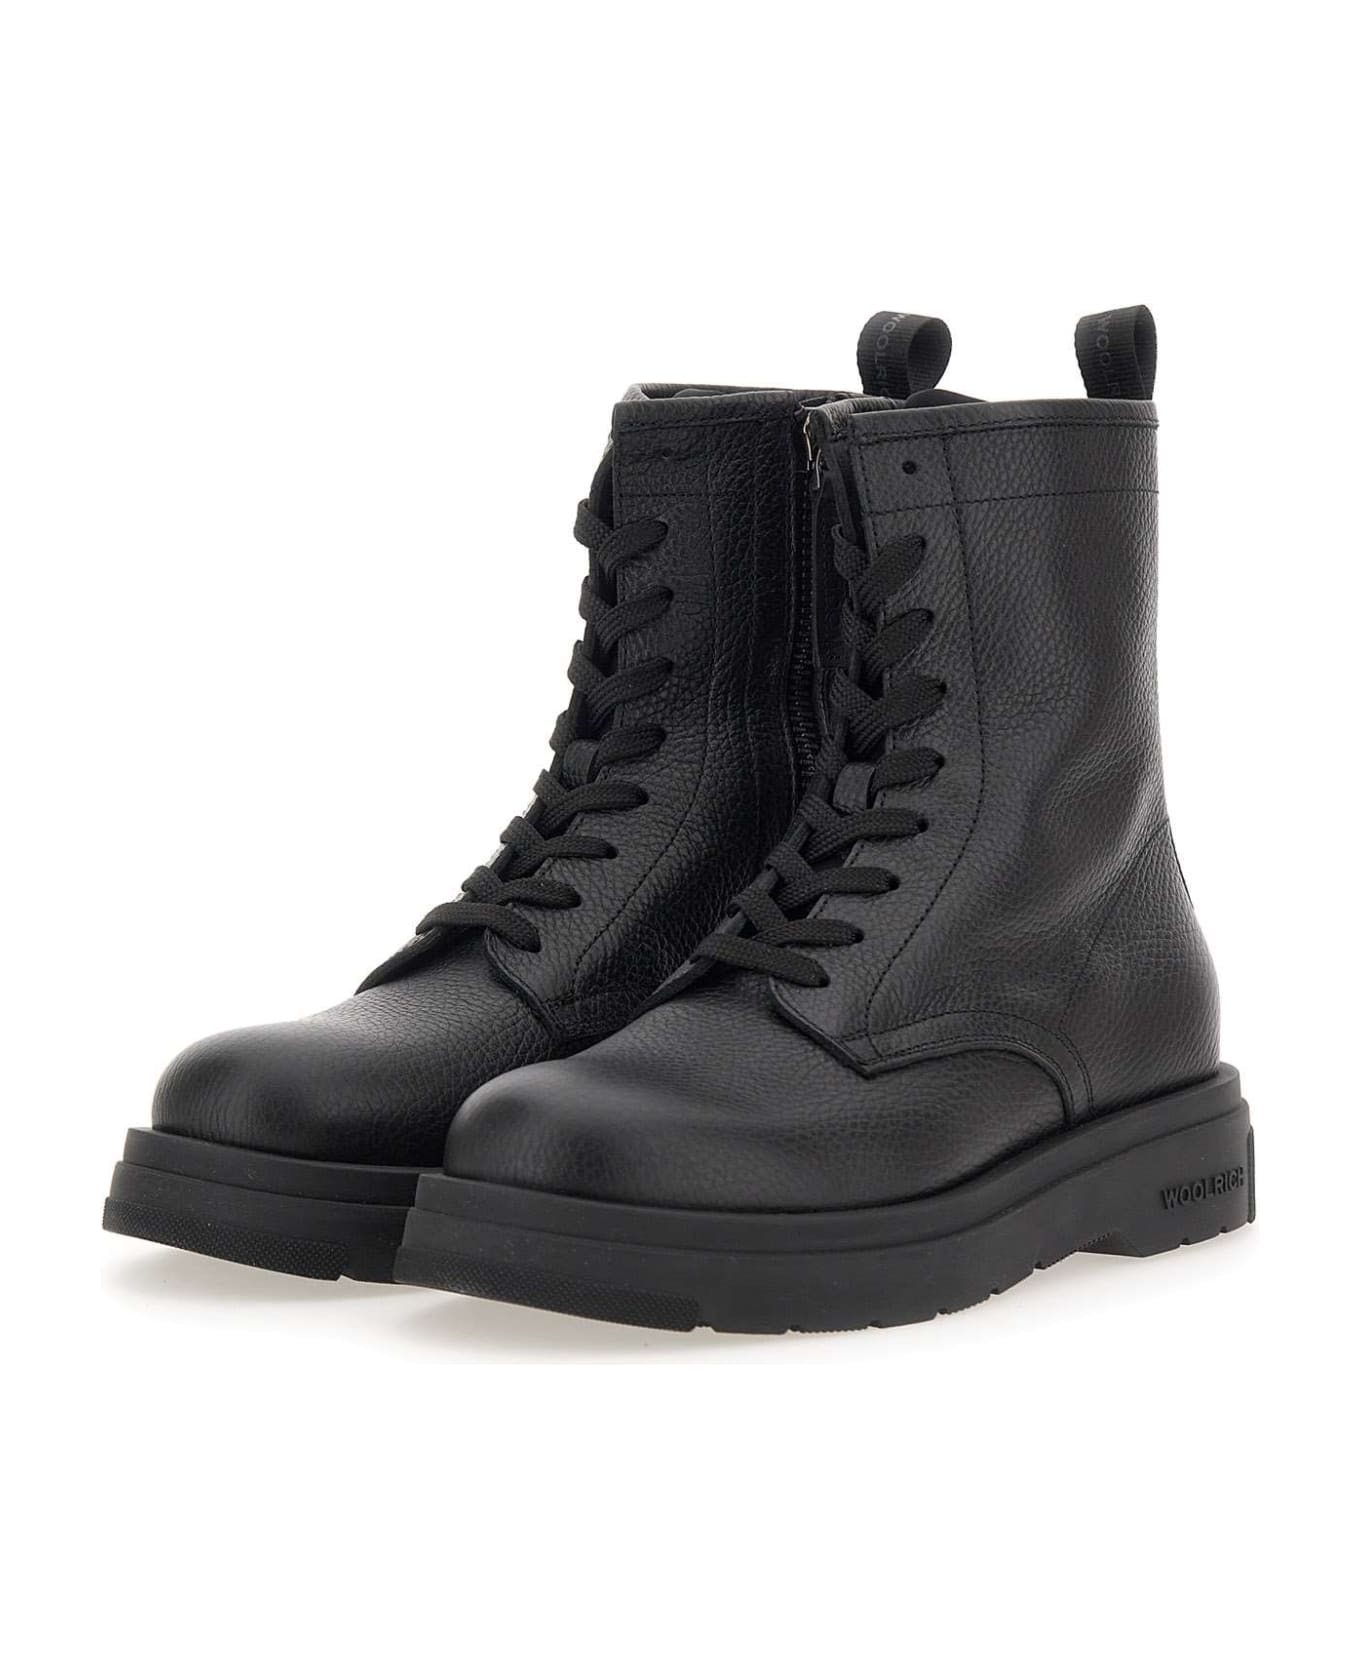 Woolrich New City' Tumbled Leather Boots - Black ブーツ